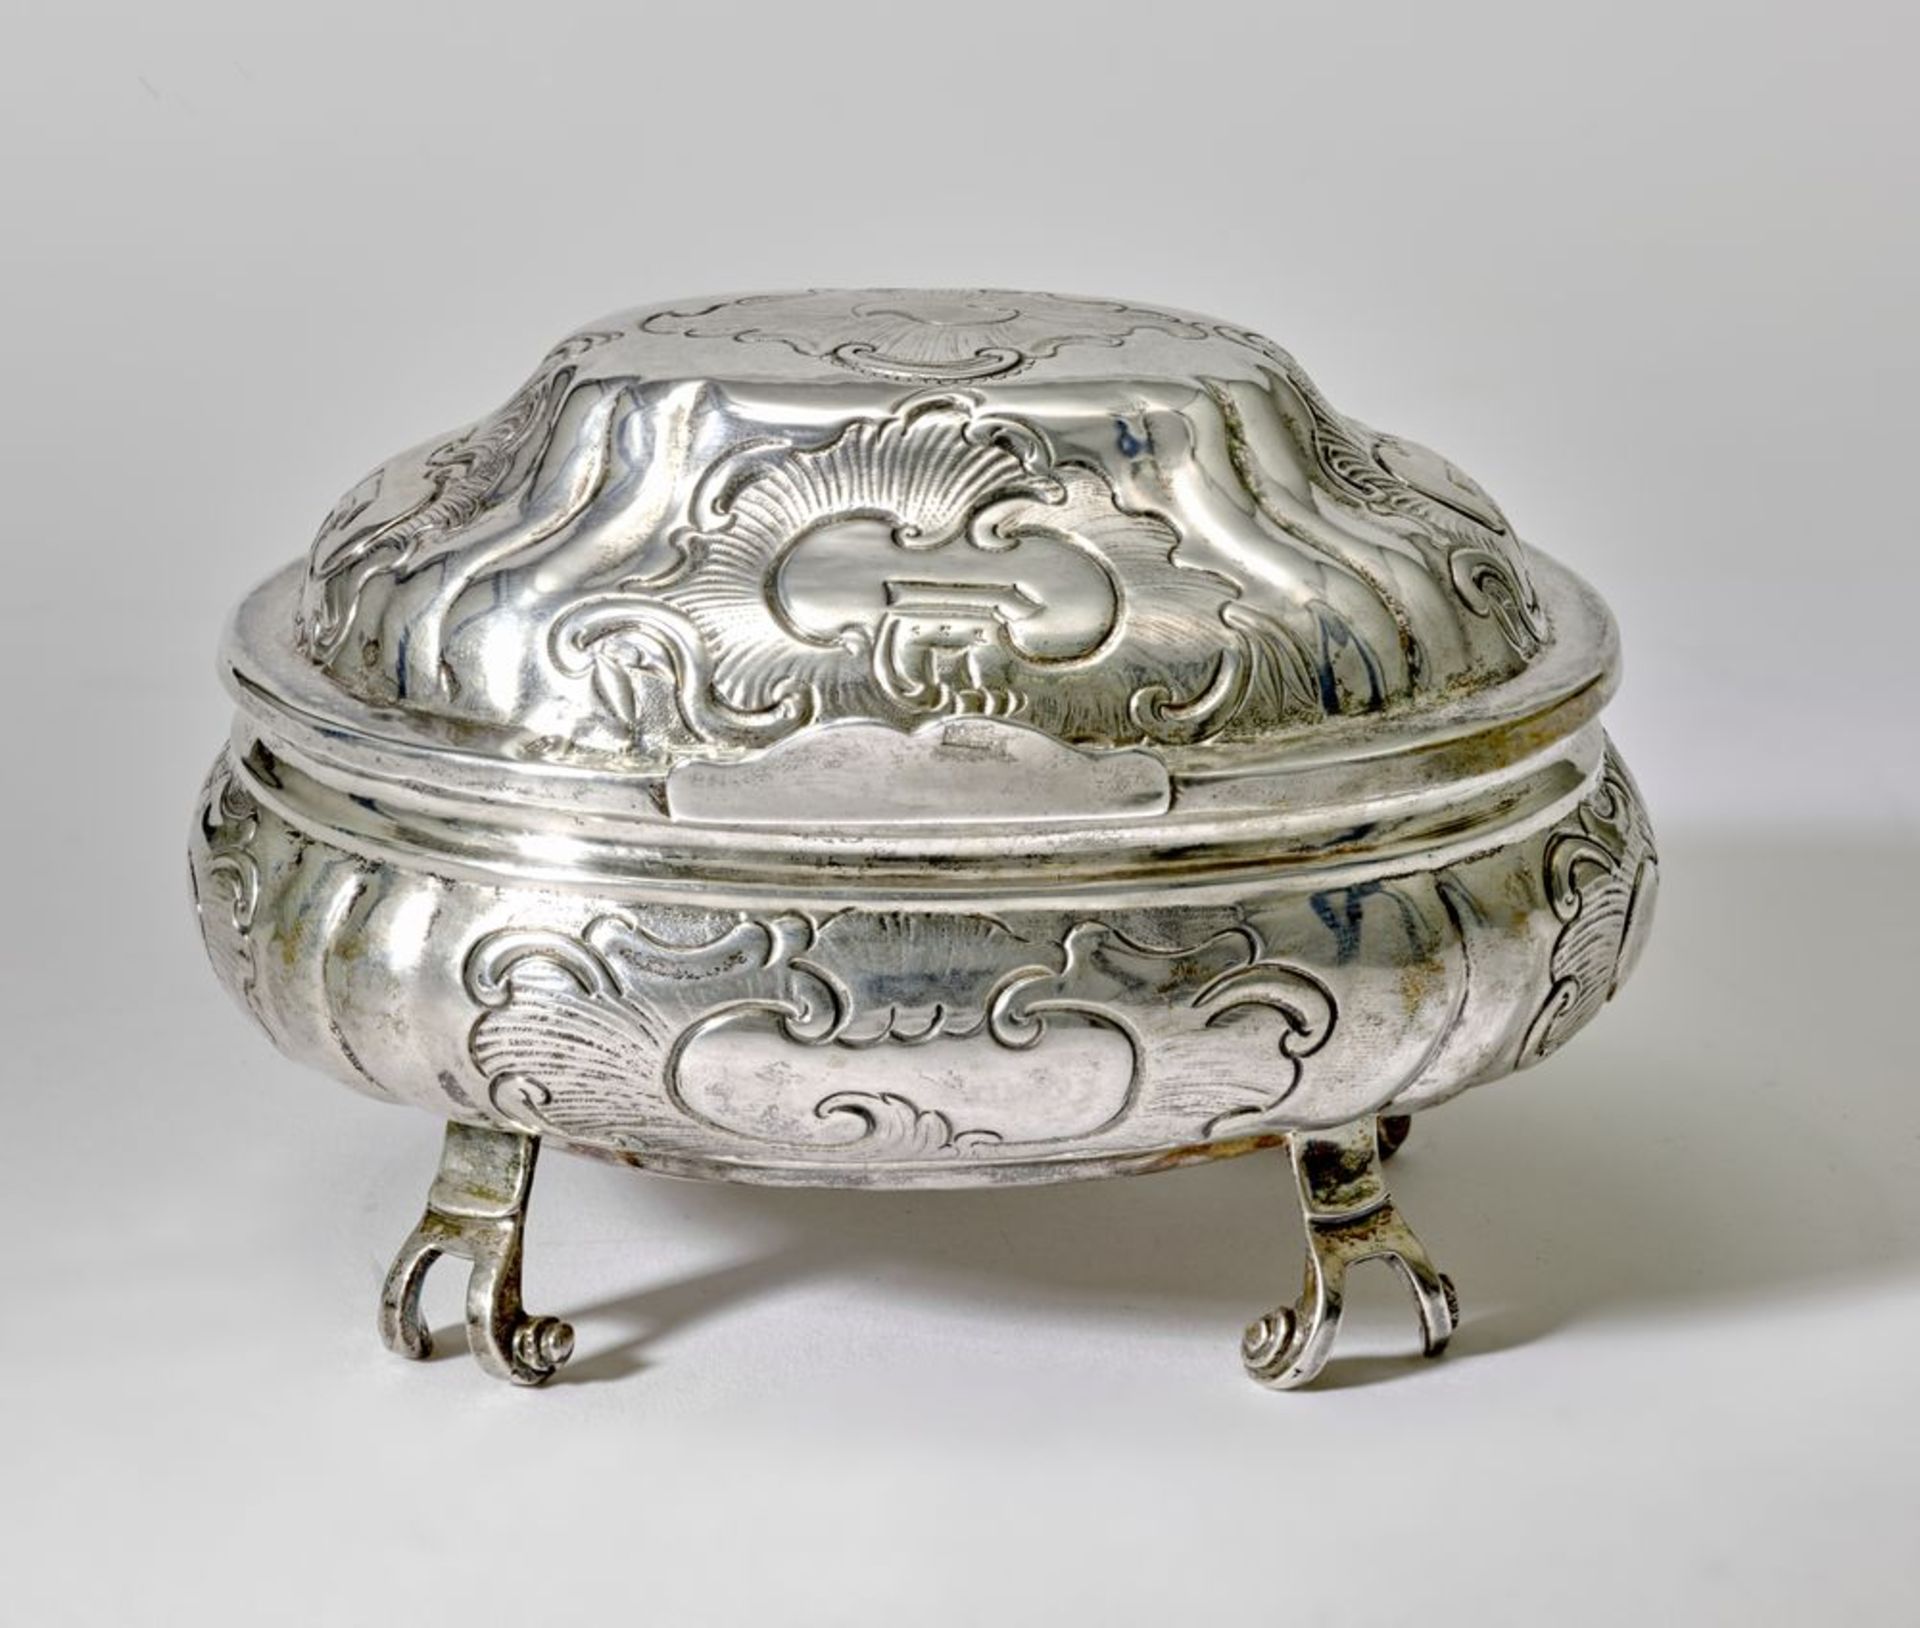 SILVER OVAL CAVIAR WITH A LID ON ROUNDED LEGS WITH A ROCAILLE DECOR.